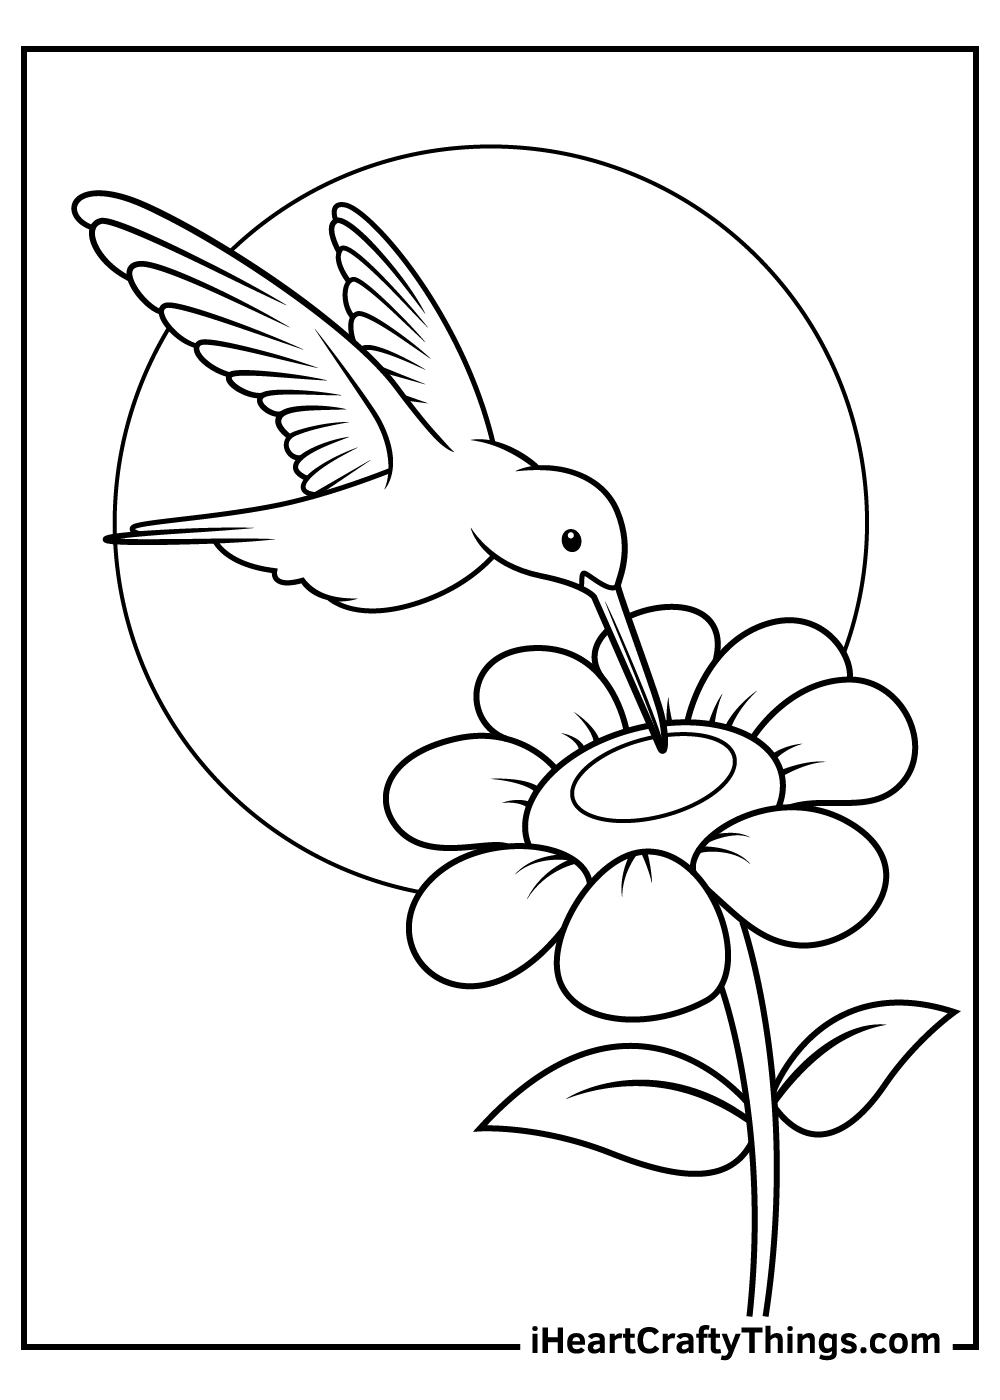 hummingbird coloring pages for adults 